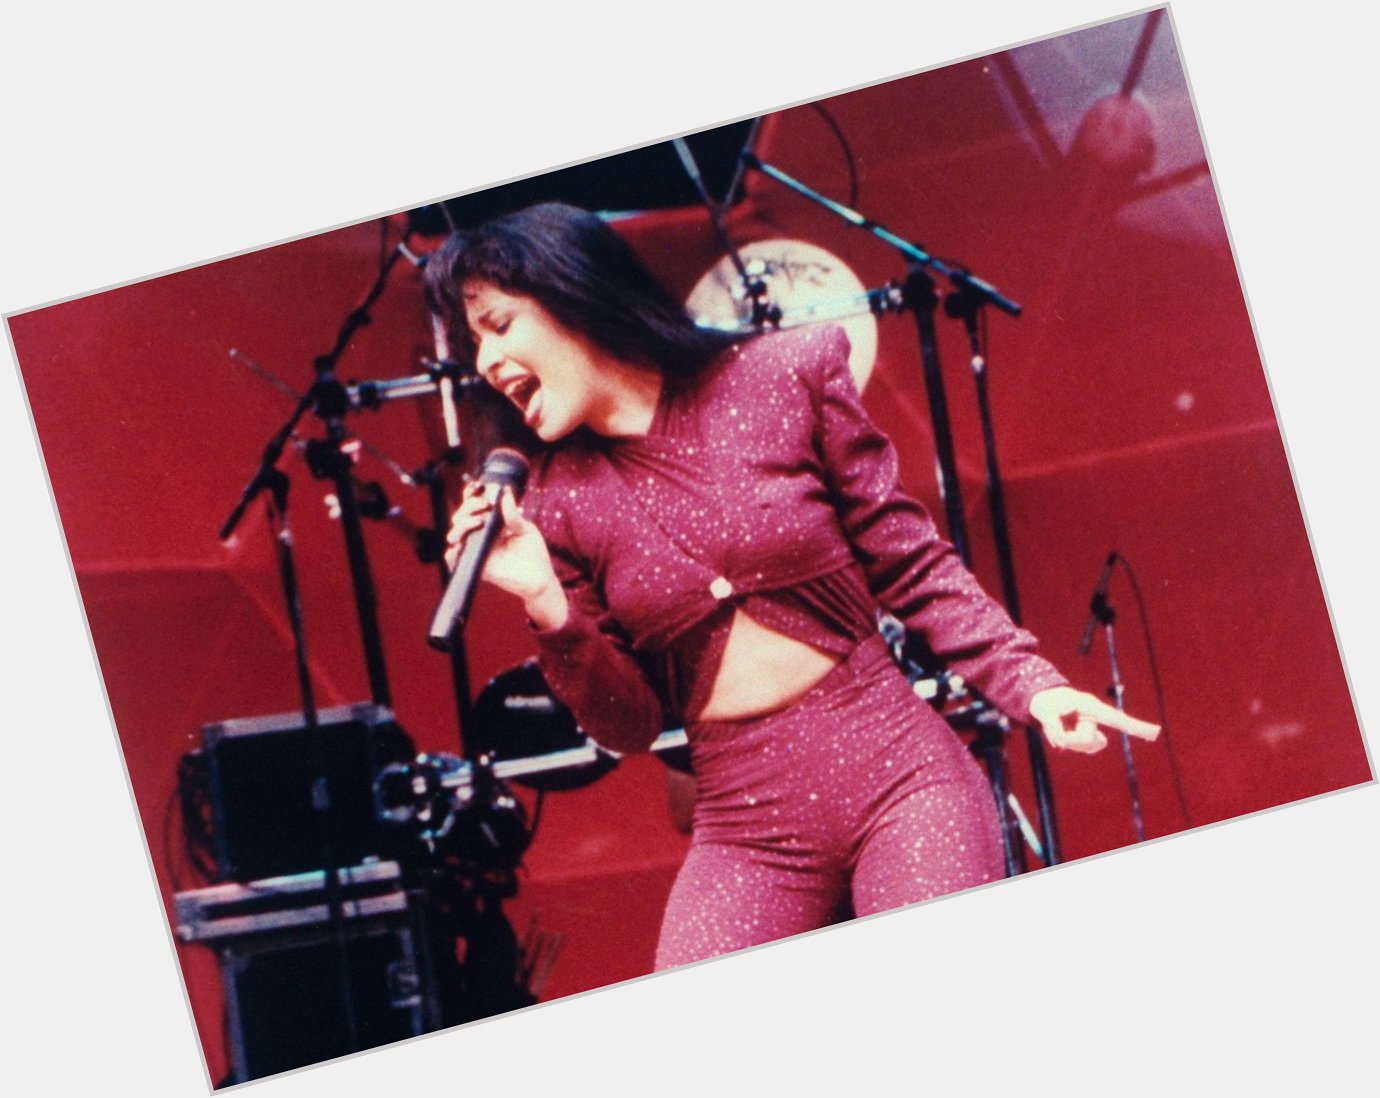 Happy Heavenly Birthday to Hispanic superstar Selena Quintanilla, who would have been 51 today. 